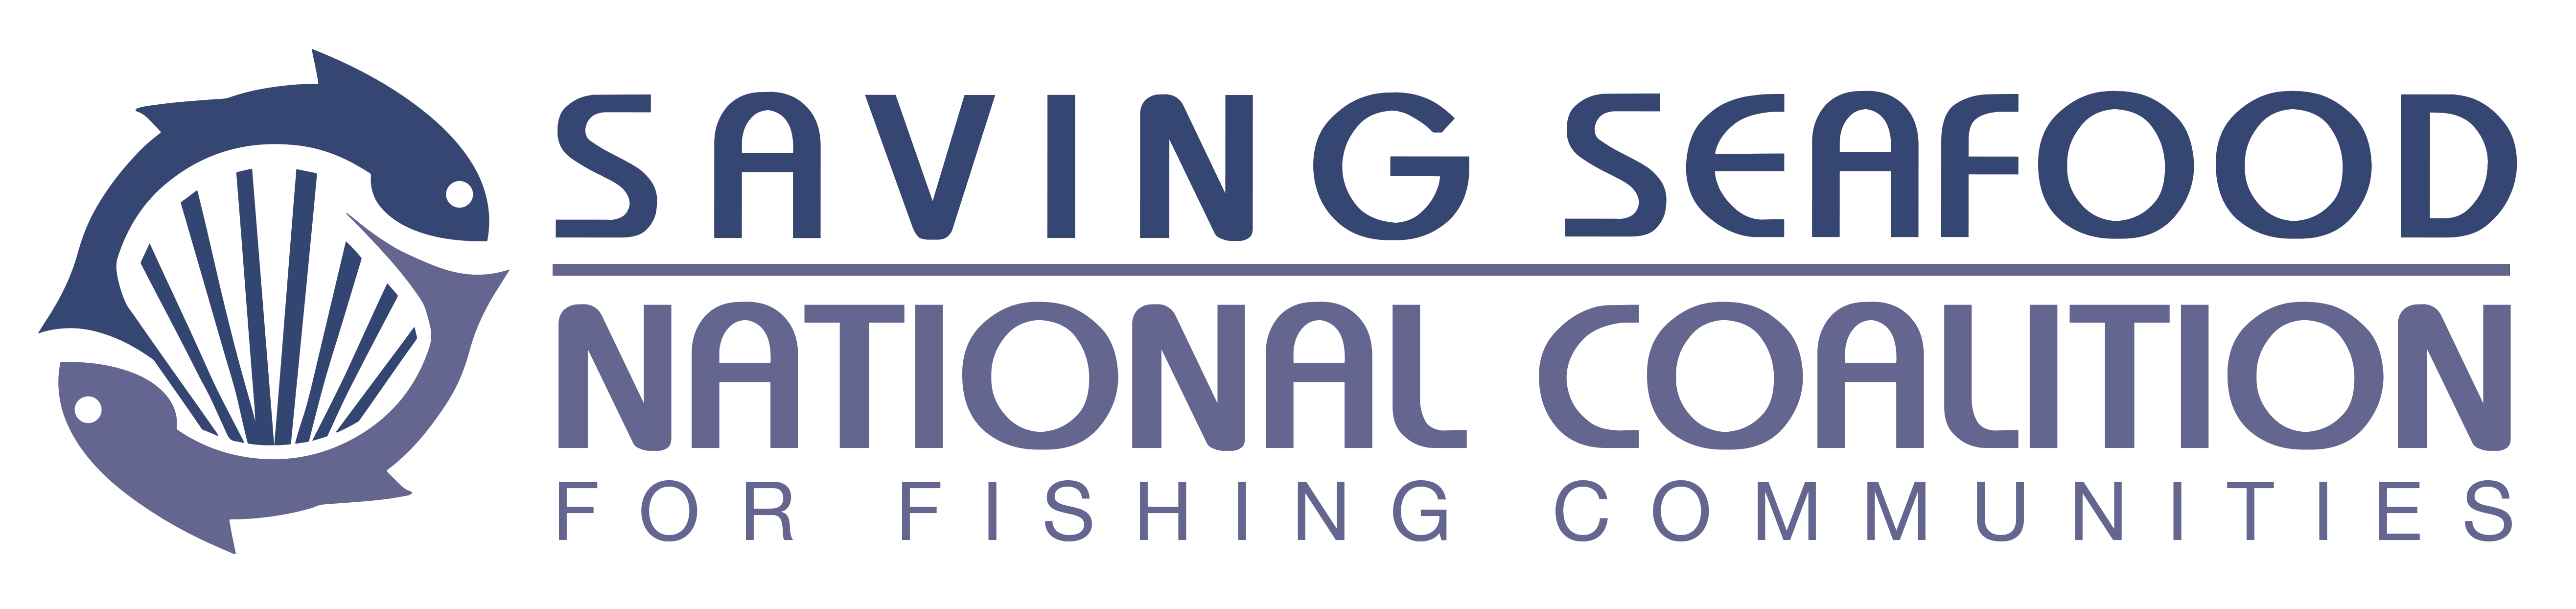 National Coalition for Fishing Communities